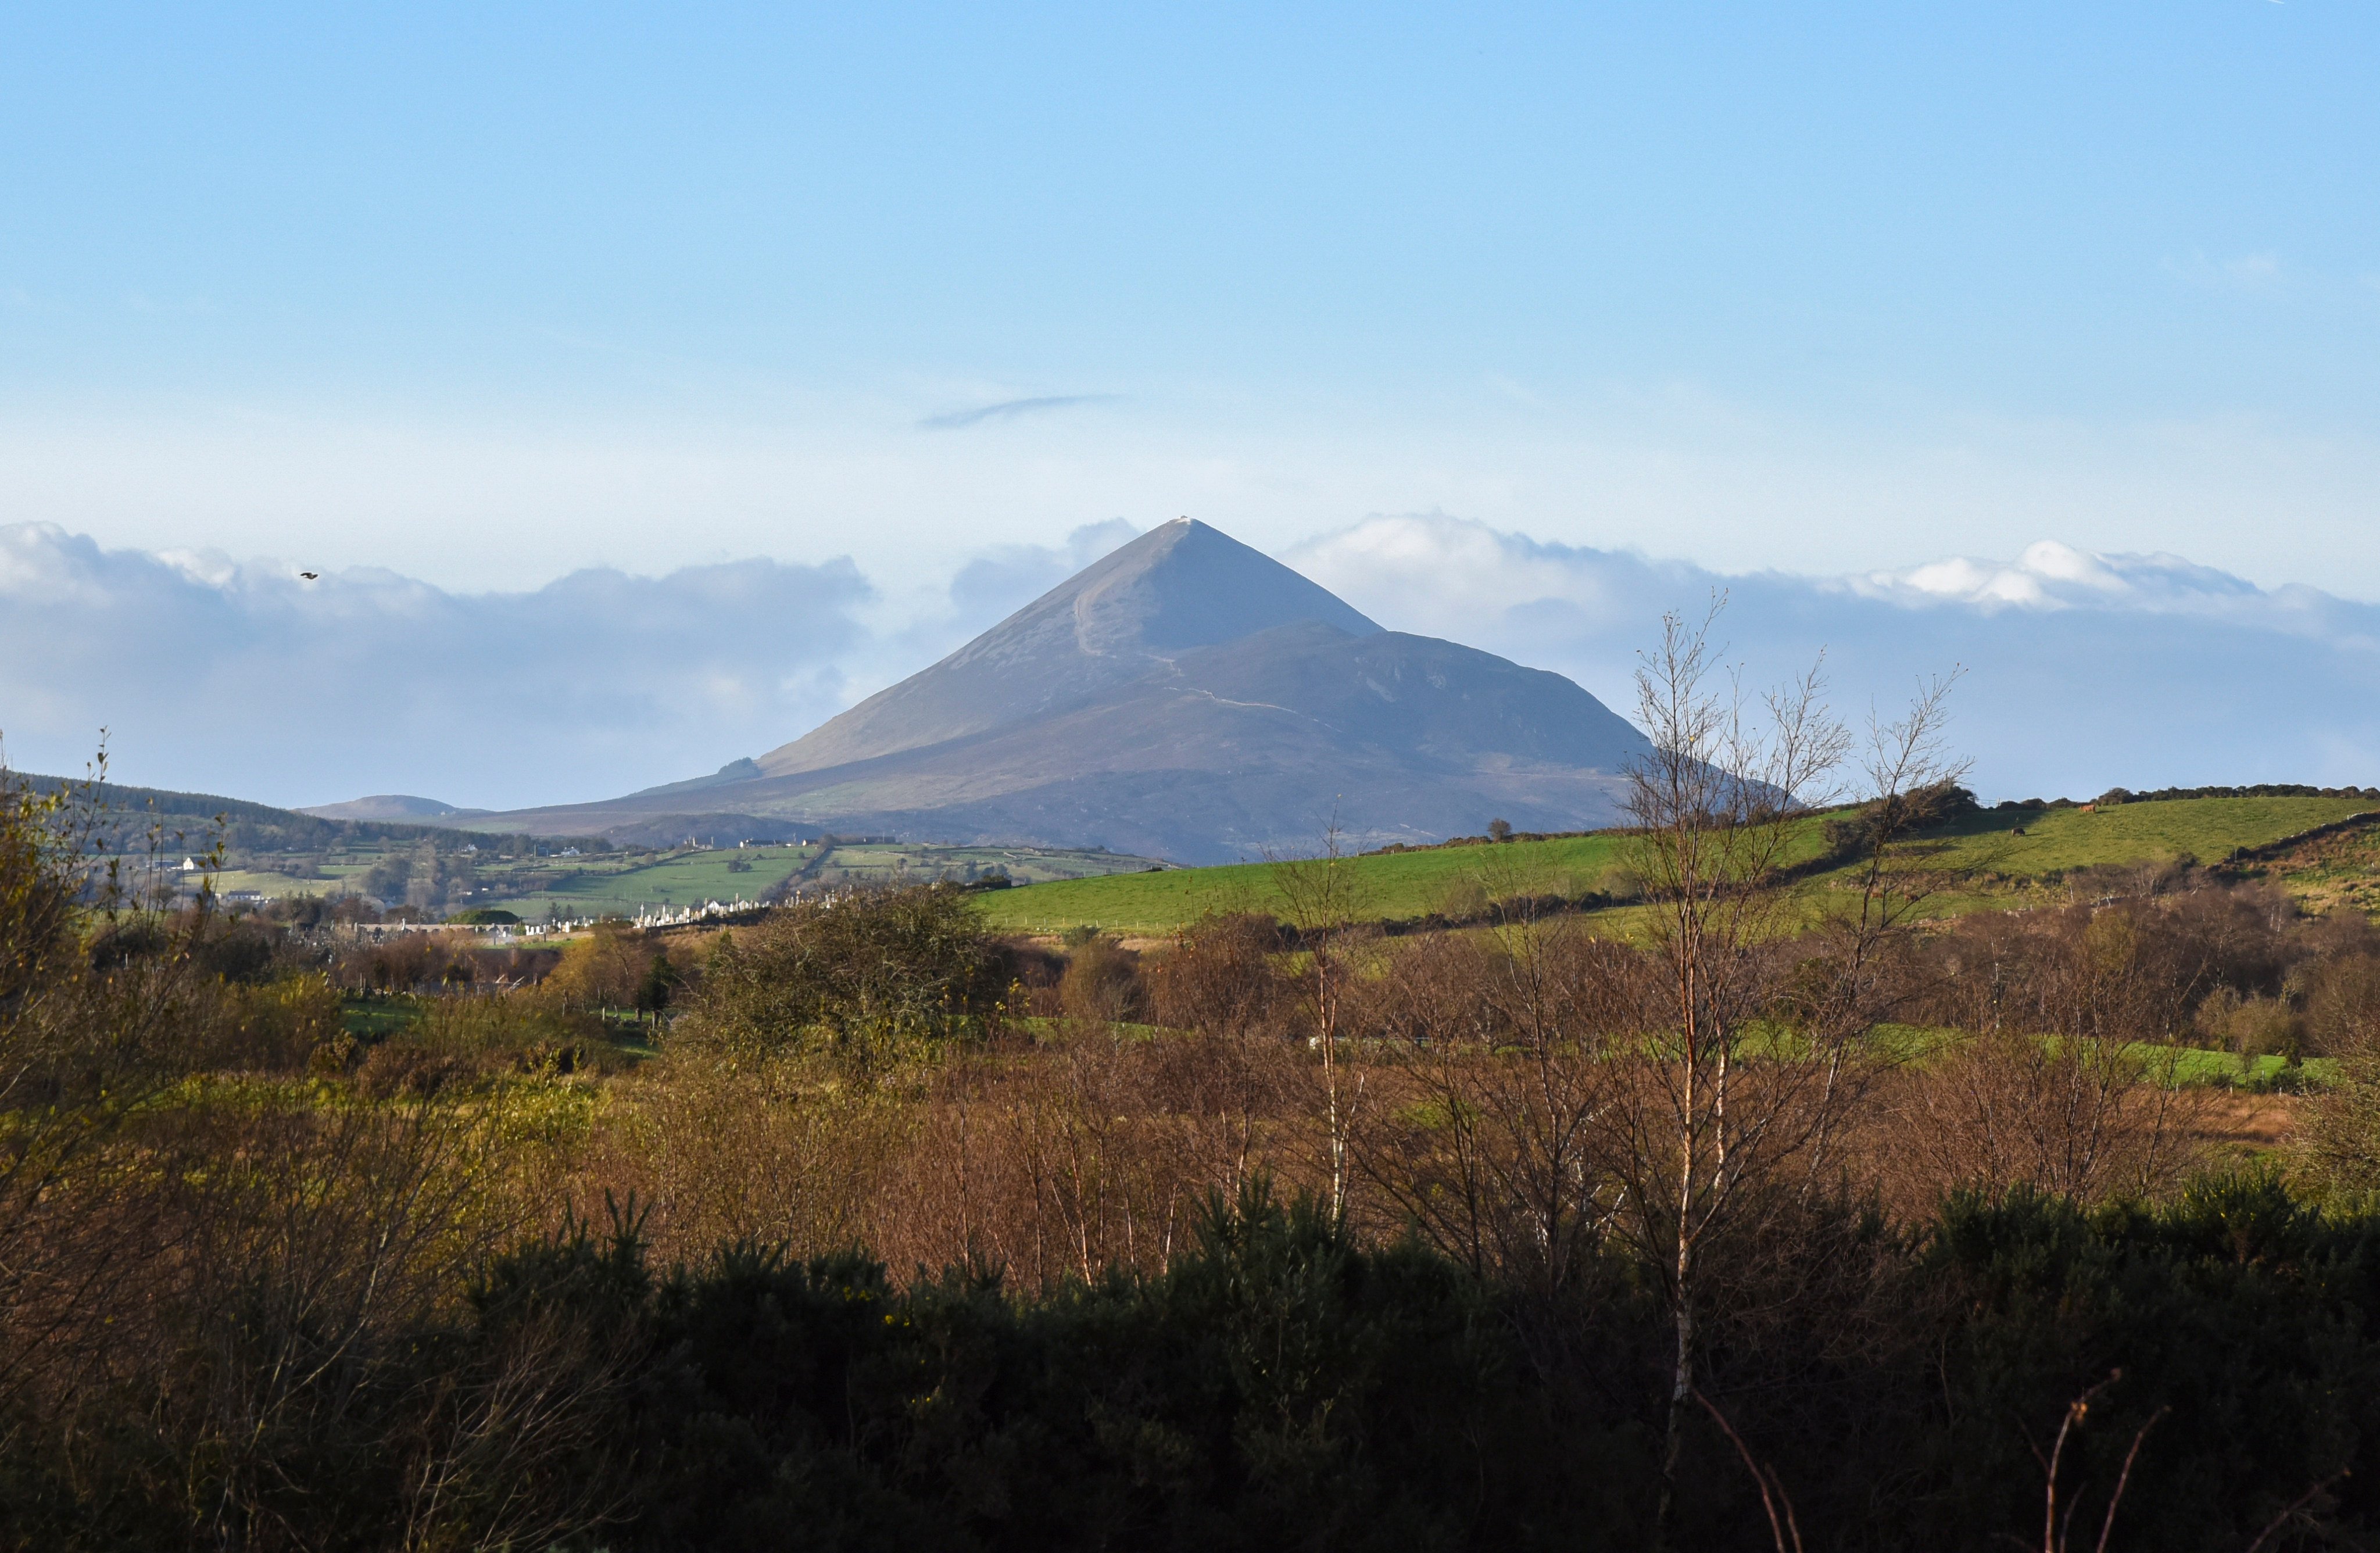 Croagh Patrick, on the summit of which St Patrick built a church. Photo: Ronan O’Connell